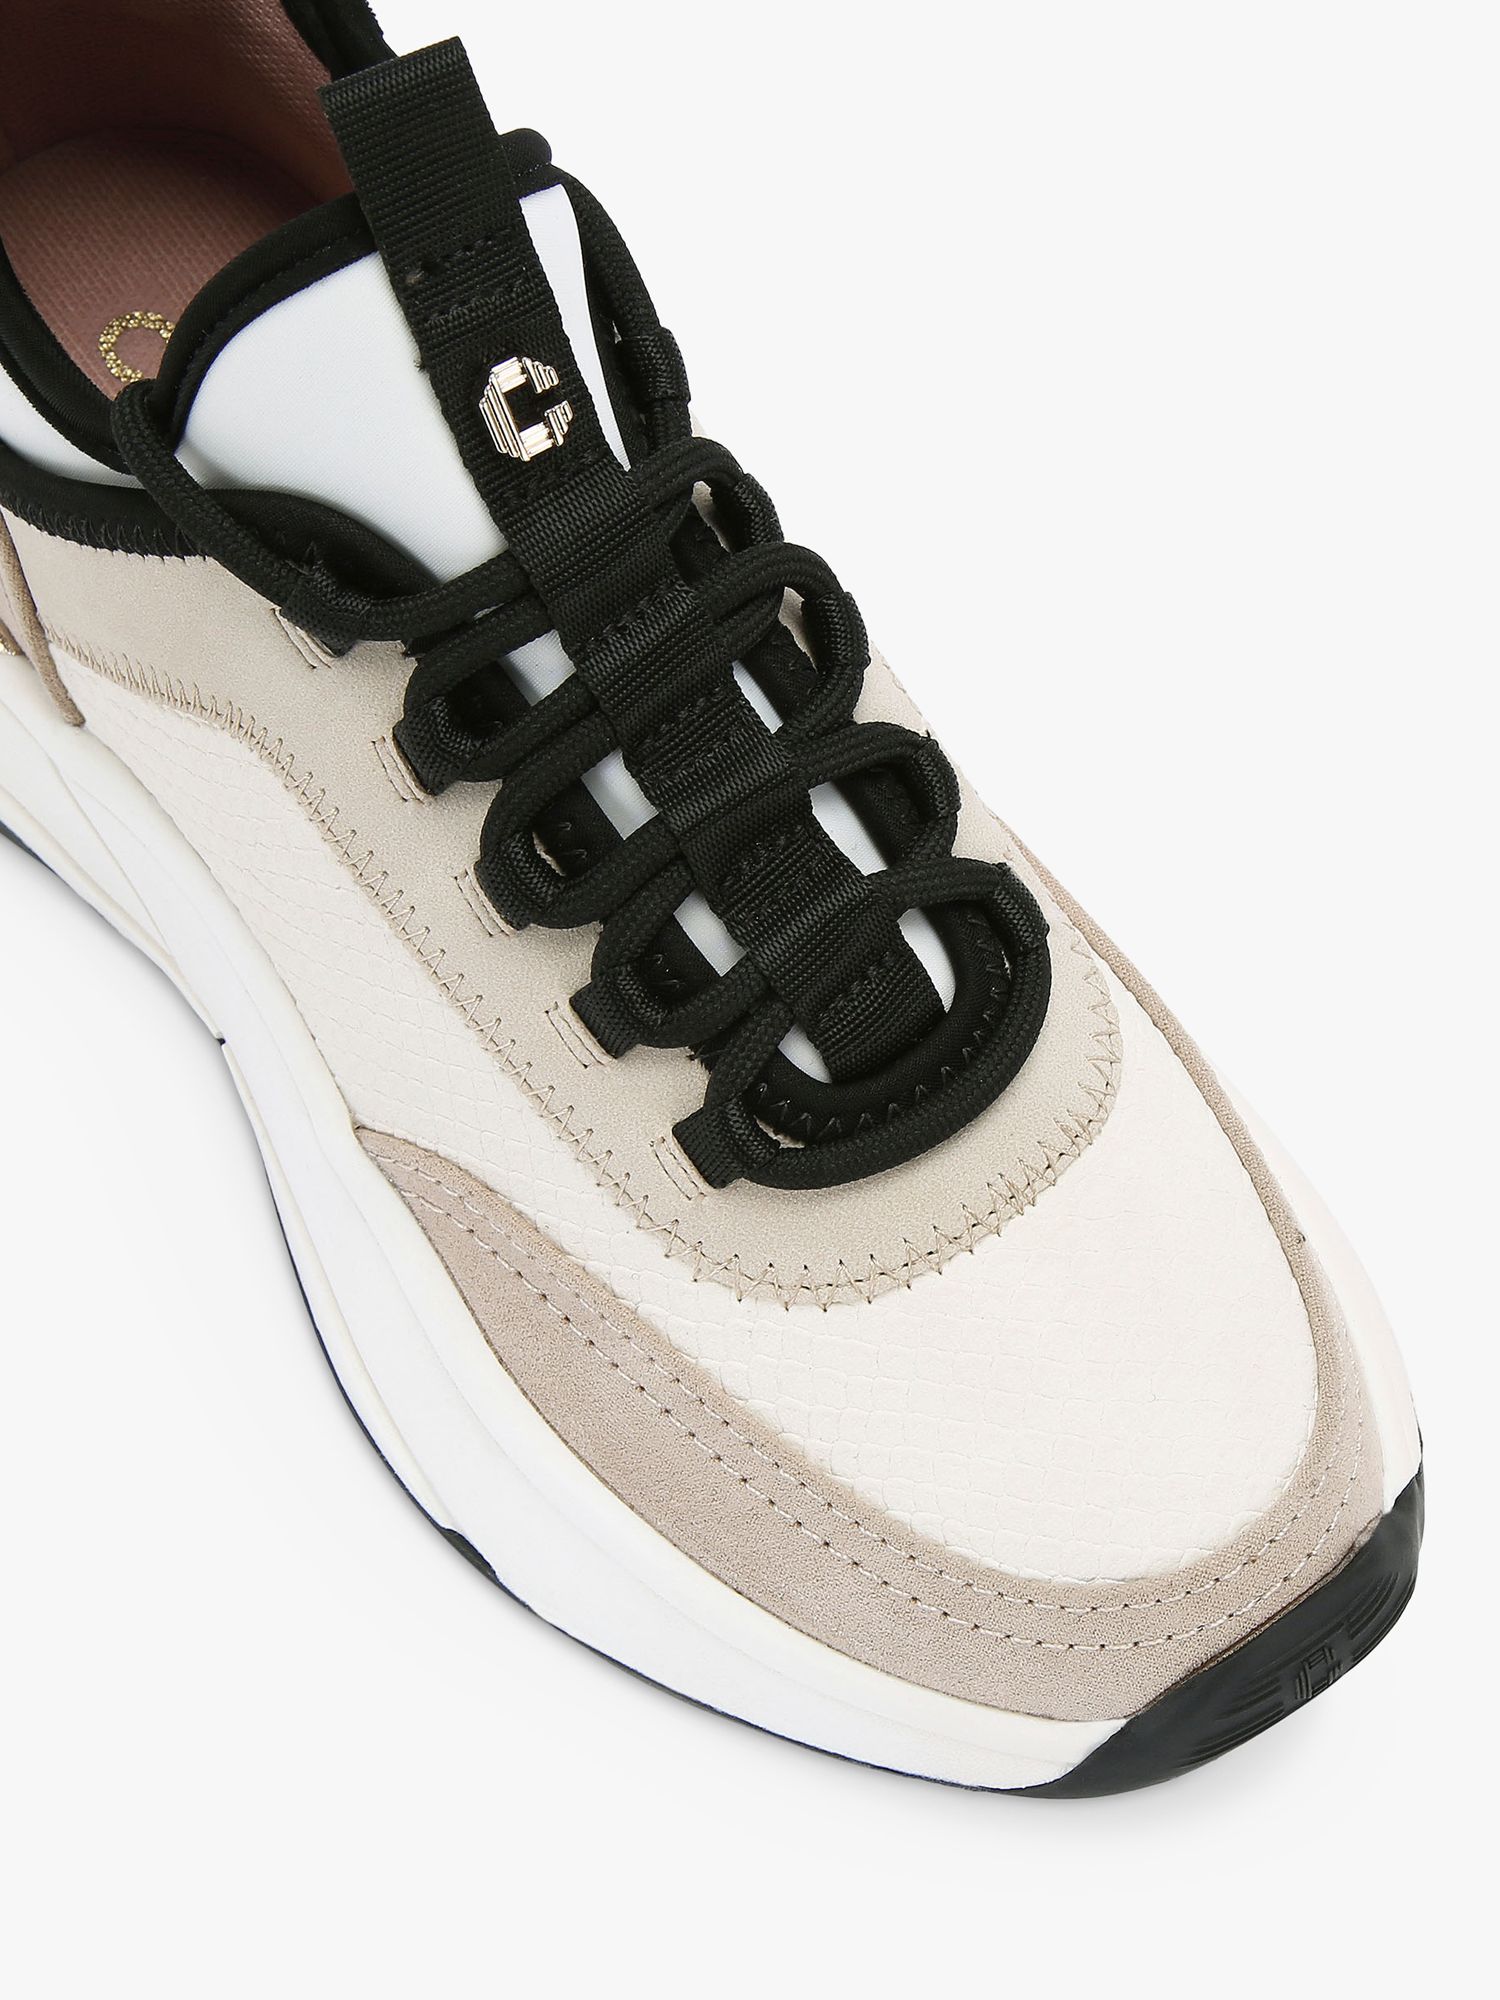 Carvela Swift Runner Lace Up Trainers at John Lewis & Partners